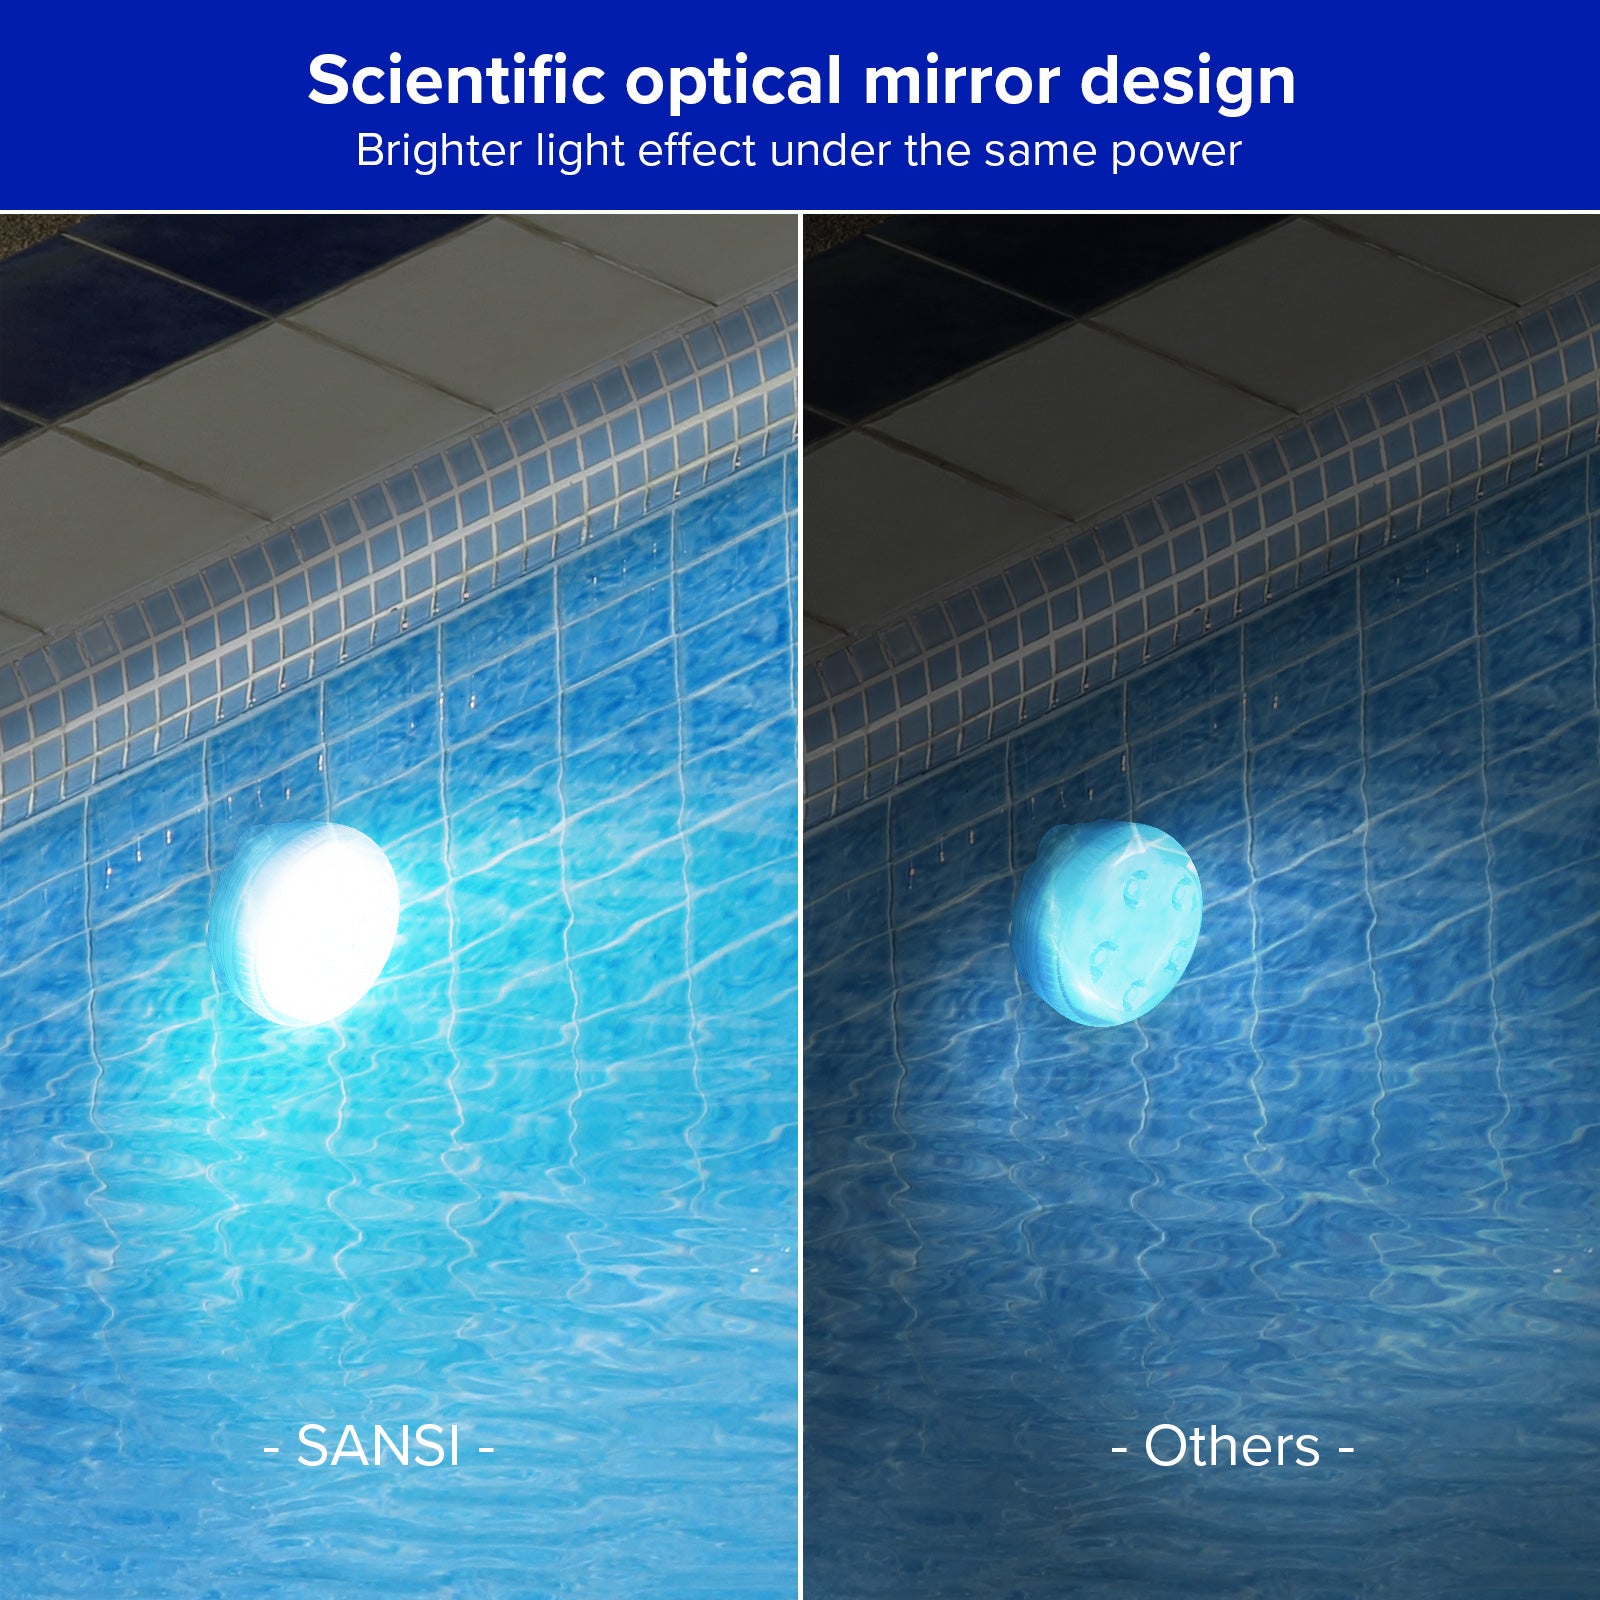 RGB LED Submersible Pool Light (US ONLY) has scientific optical mirror design.Brighter light effect under the same power.